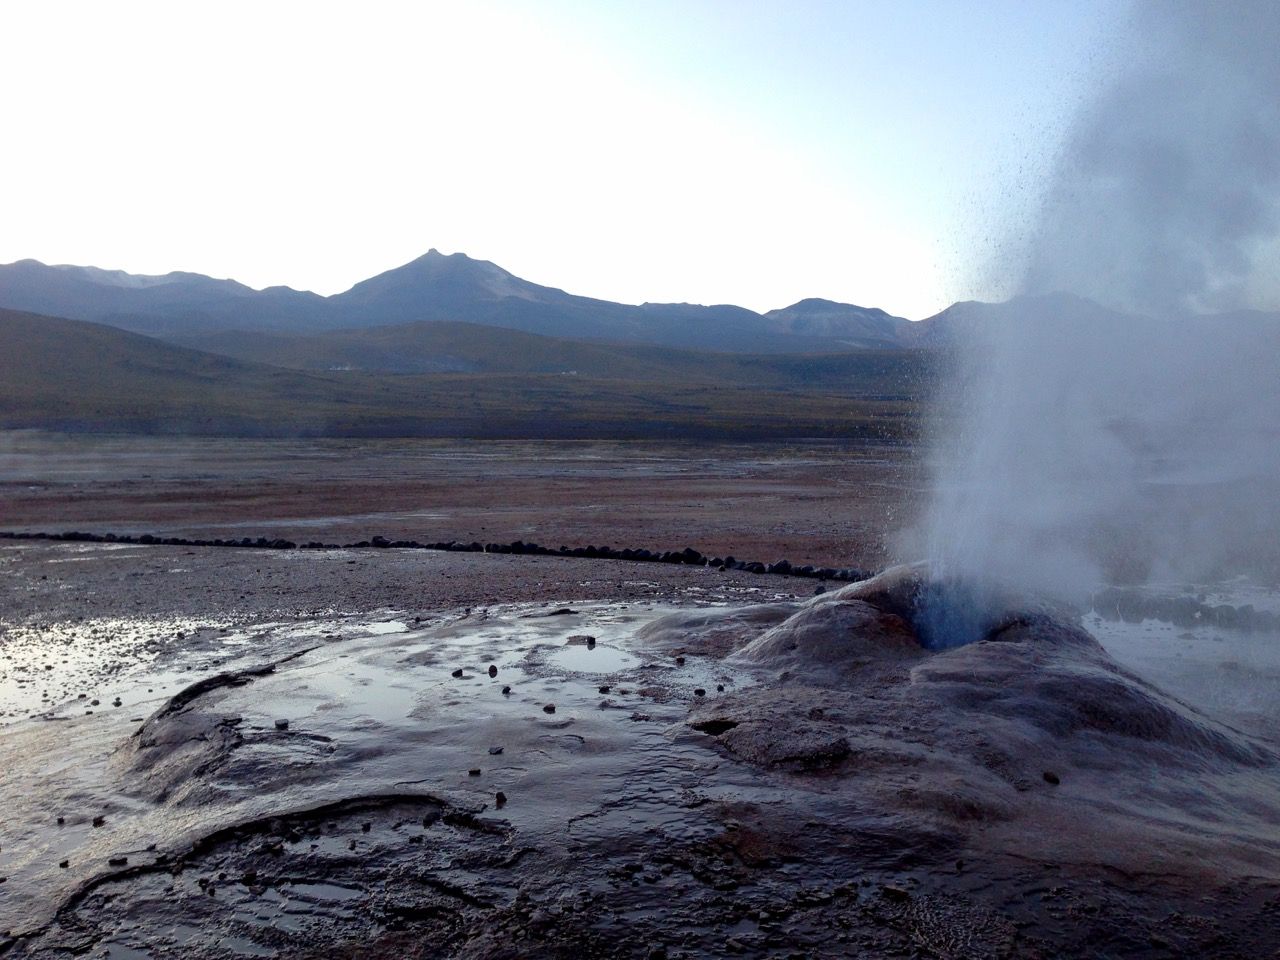 A geyser spewing steam with mountains behind it.